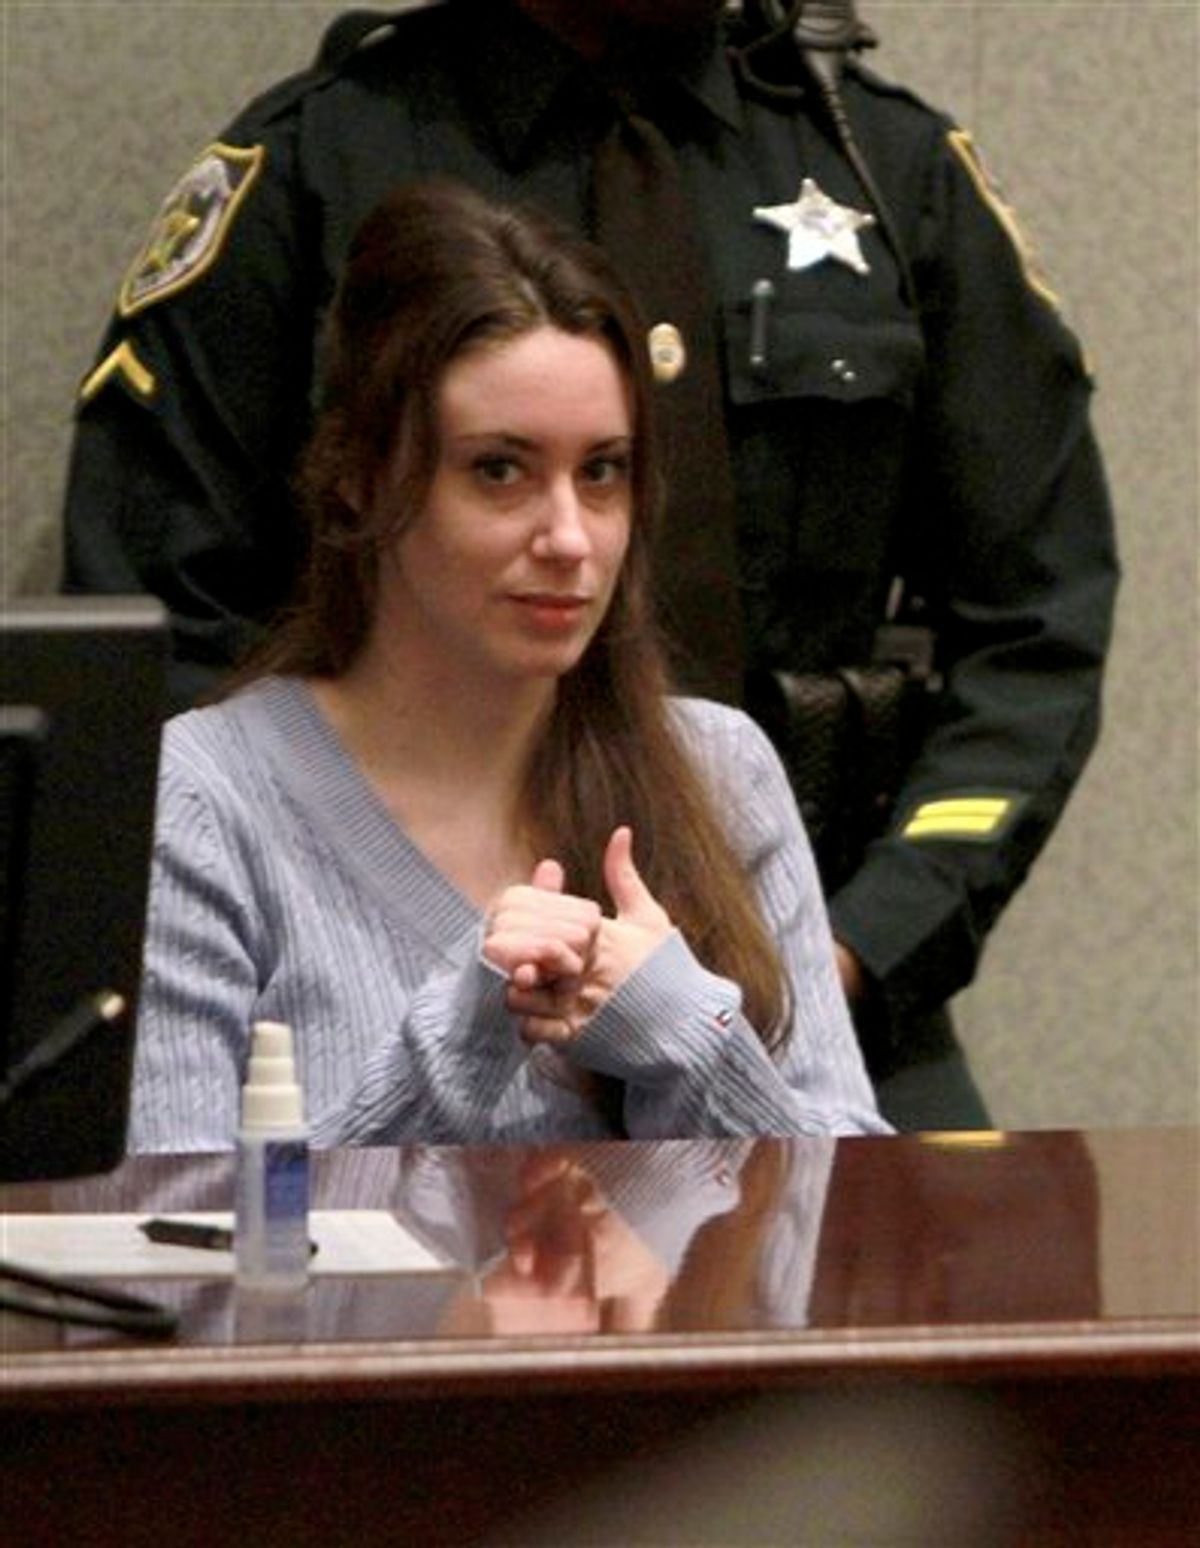 Casey Anthony sits in the courtroom before a sentencing hearing in Orlando, Fla. on Thursday, July 7, 2011. Anthony was acquitted of killing her daughter, Caylee, but faces four charges of lying to police officials. (AP Photo/Joe Burbank, Pool) (AP)